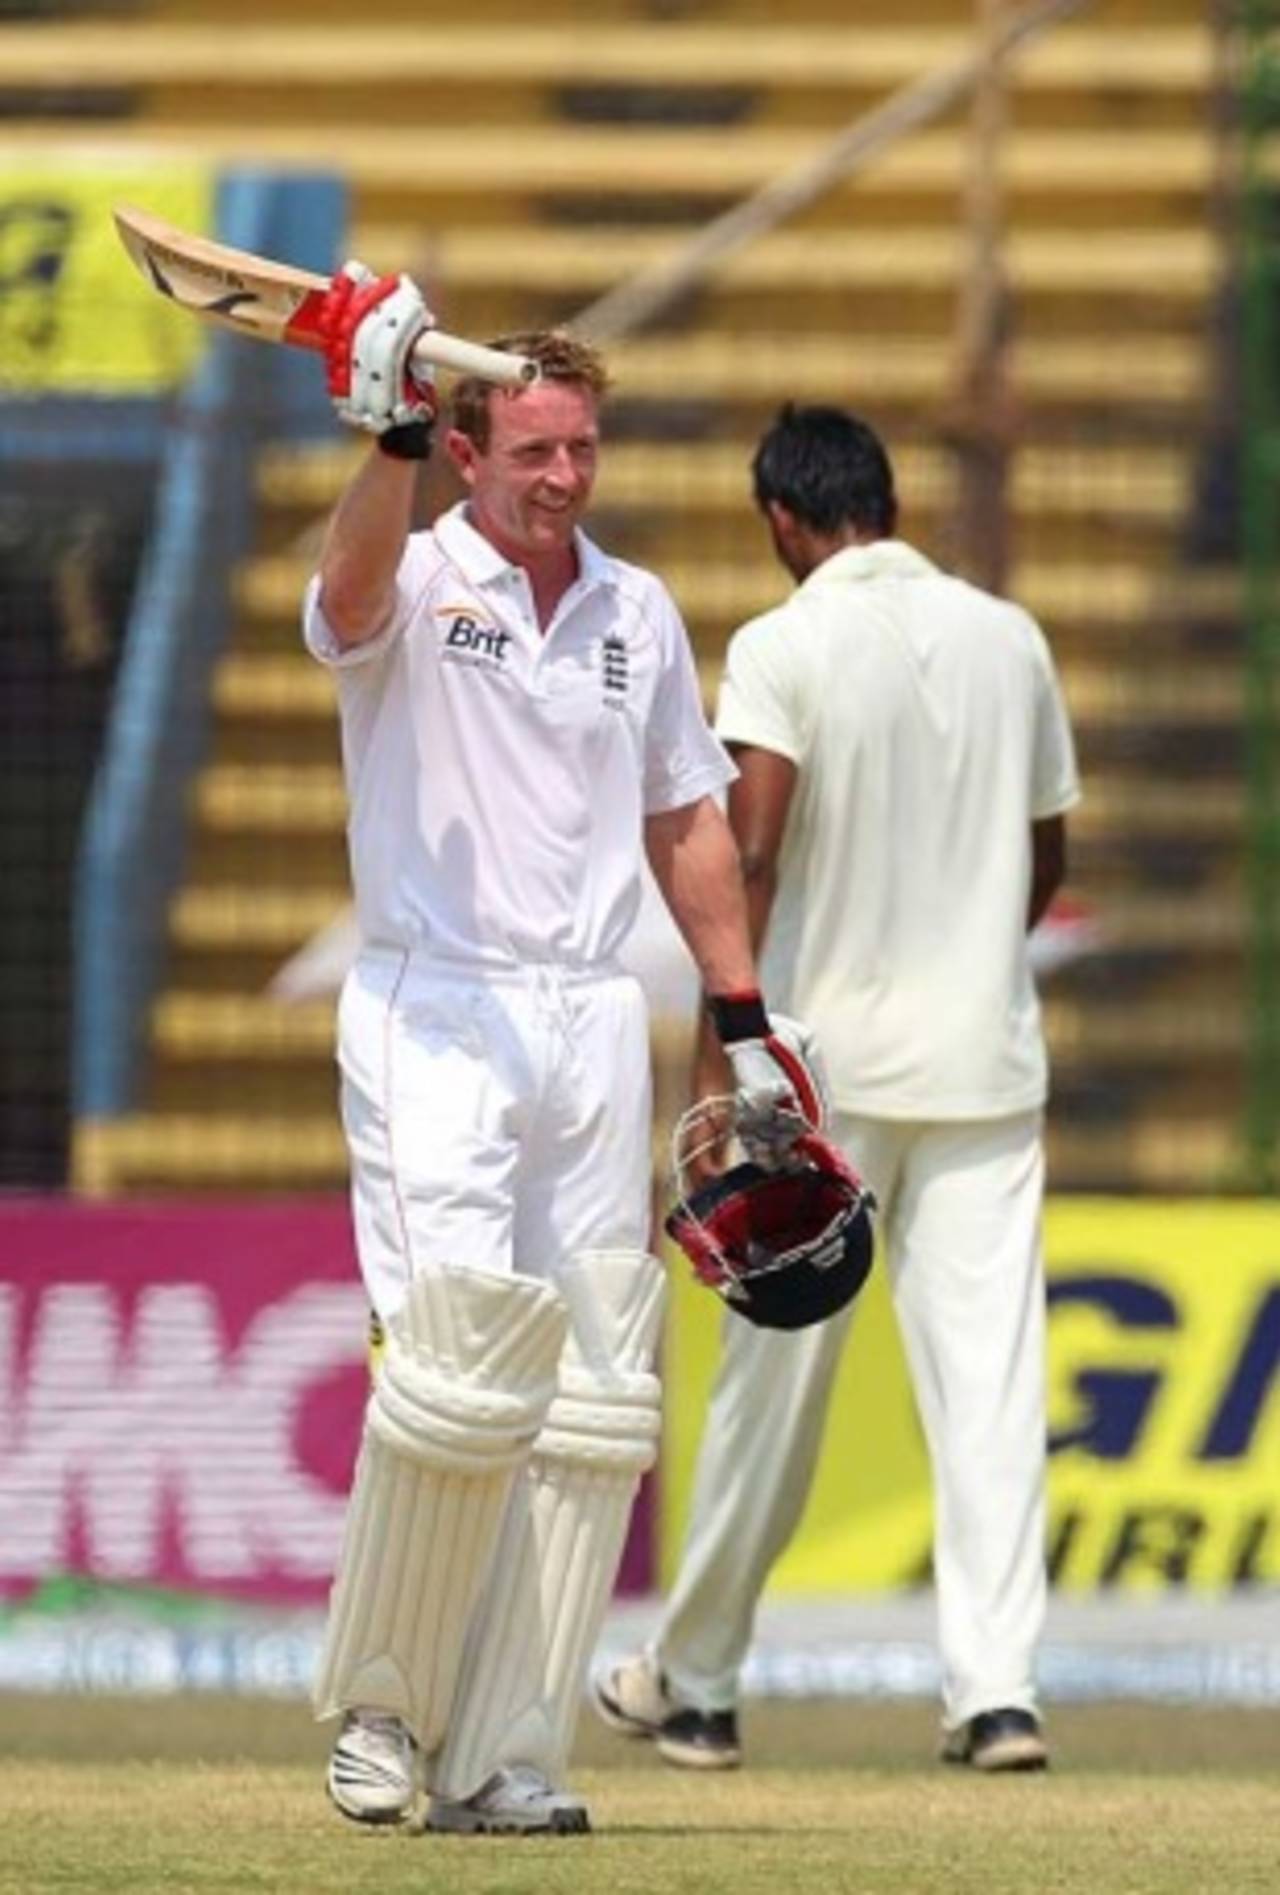 Paul Collingwood celebrates his 10th Test hundred, Bangladesh v England, 1st Test, Chittagong, March 13, 2010